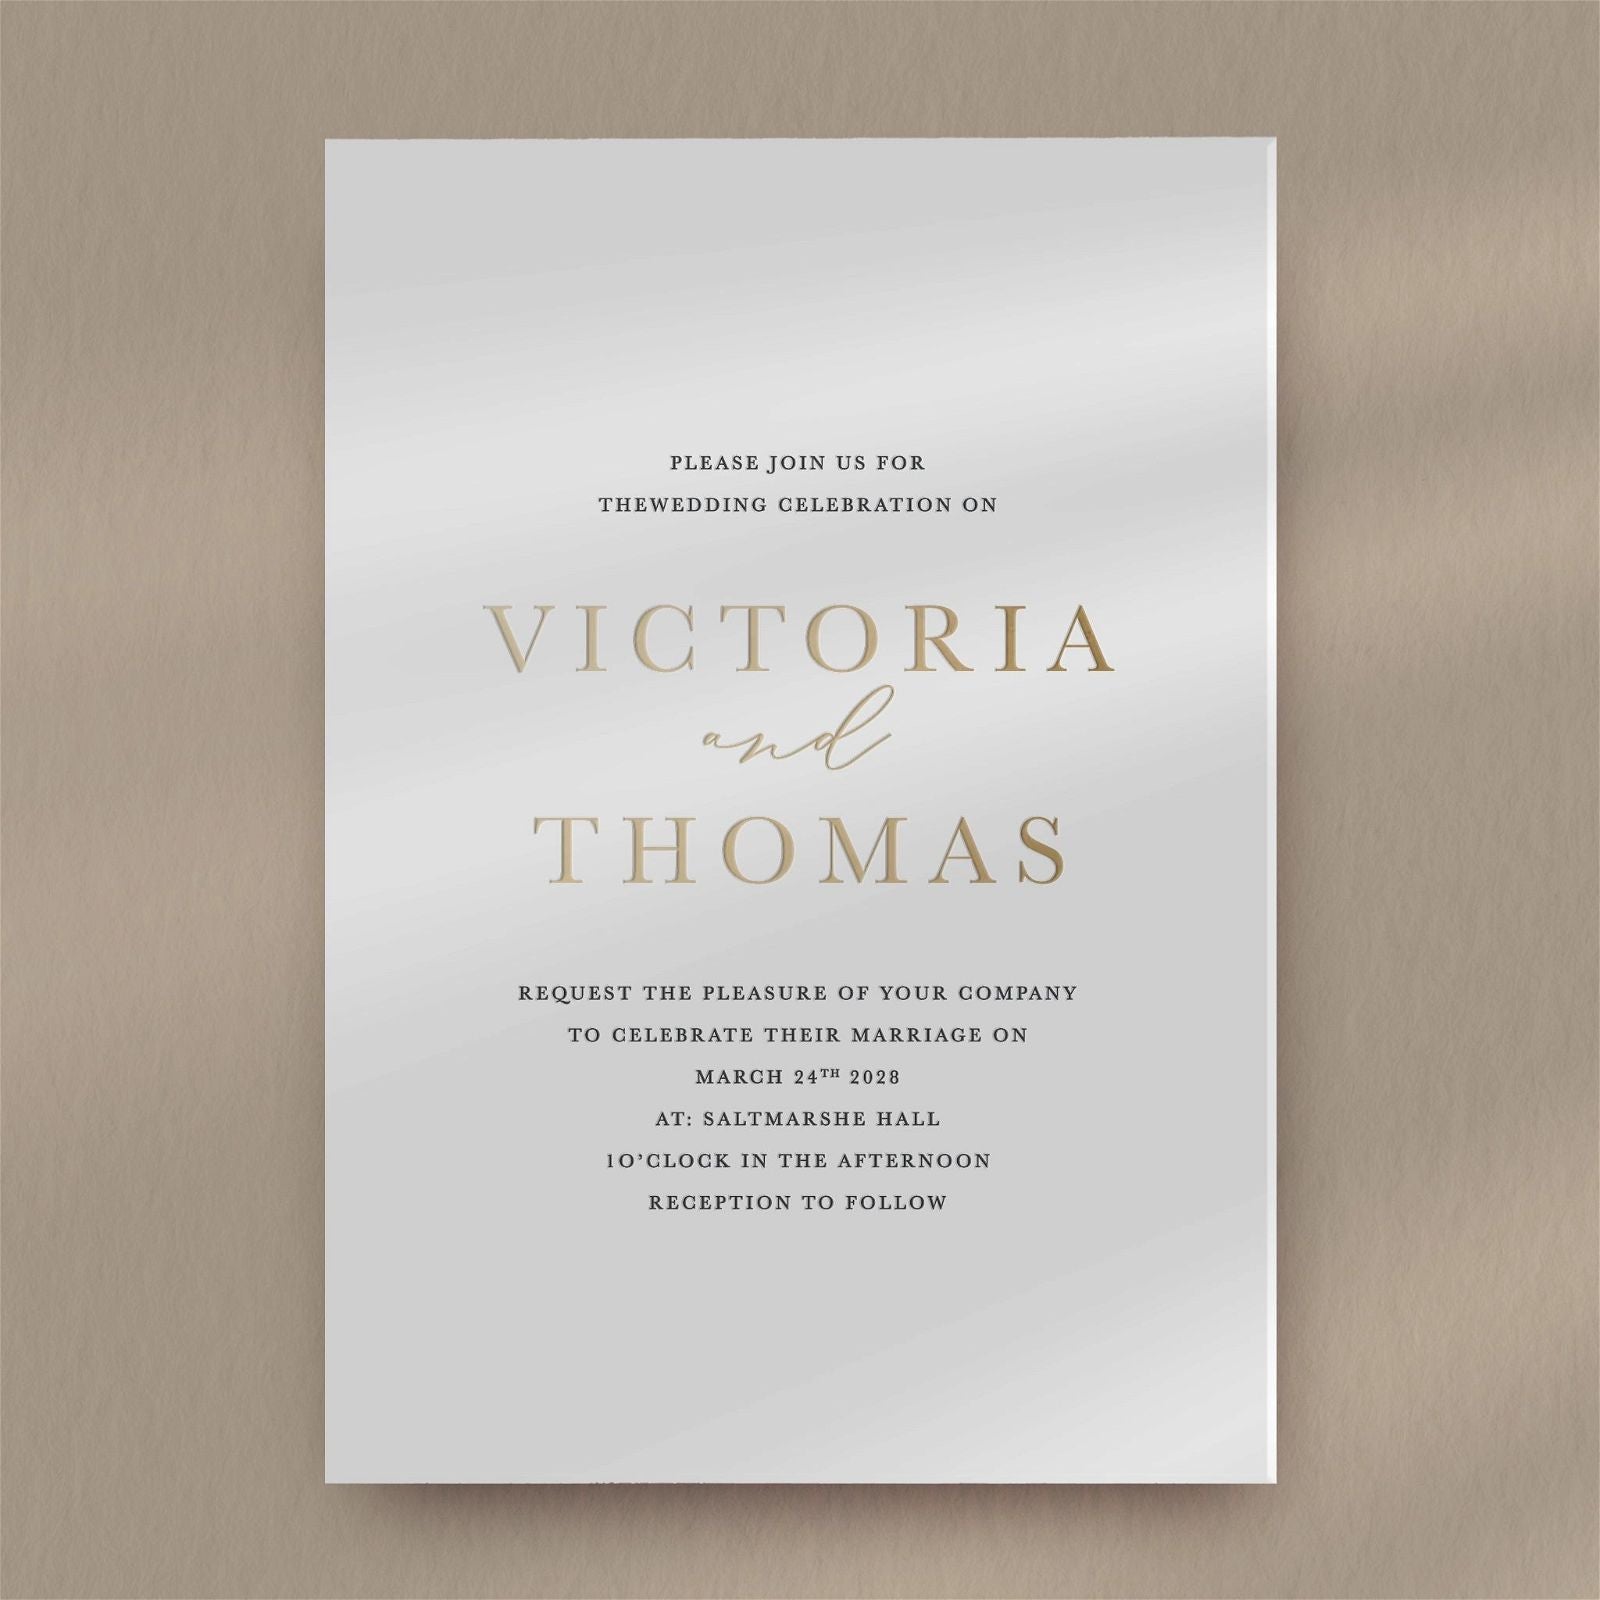 Victoria | Formal Wedding Invitations  Ivy and Gold Wedding Stationery   